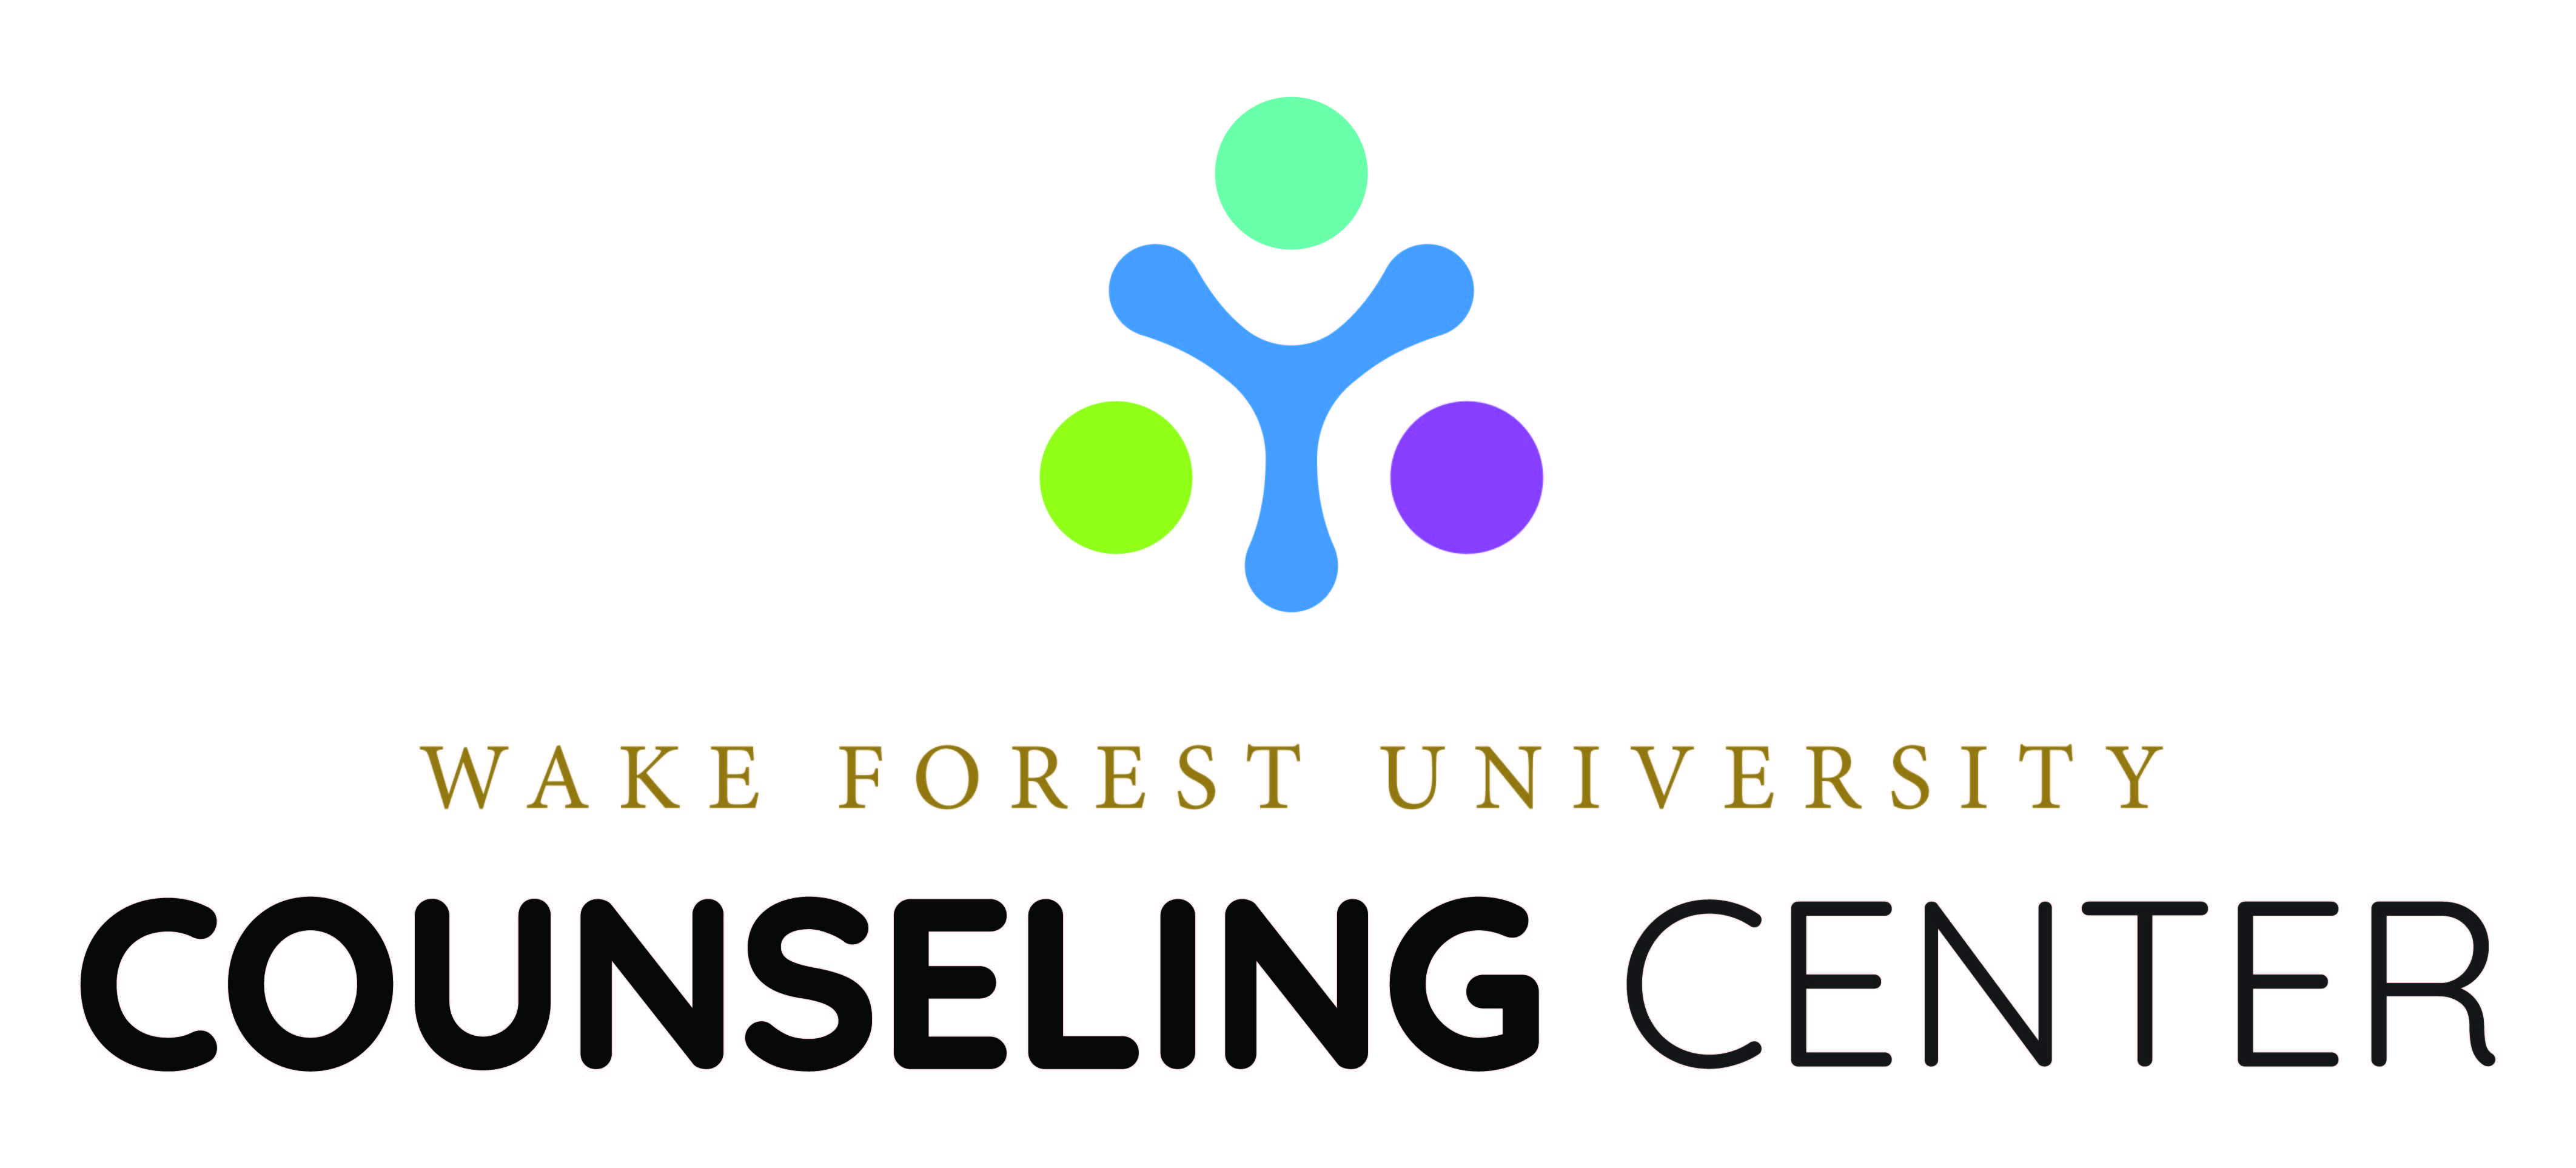 WFU Counseling Center